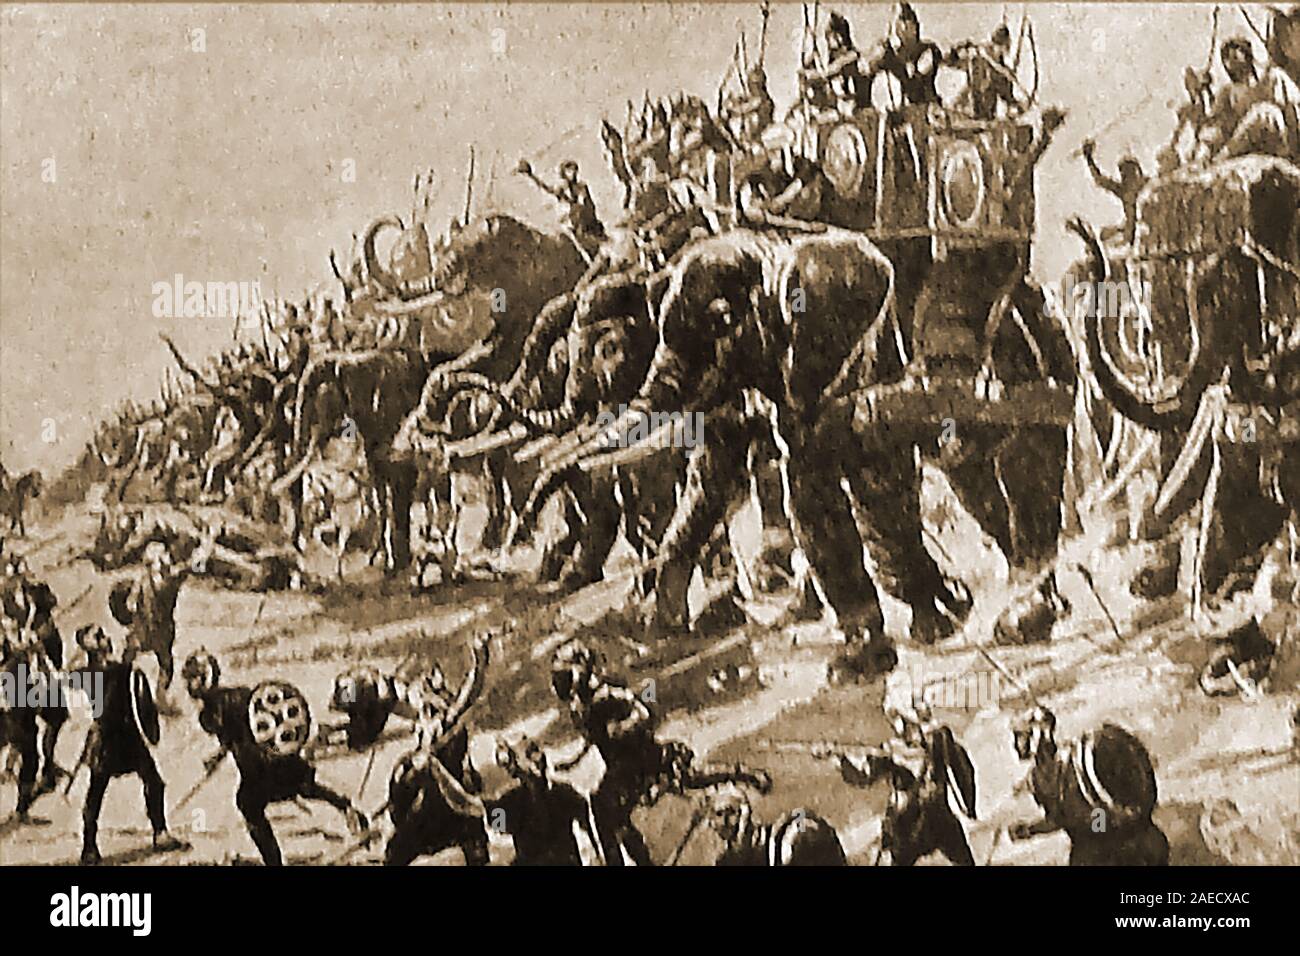 Battle of Zama  (Tunisia) aka Battle of the Elephants (202 BC) , a battle between the forces of the Roamn Scipio and Hanibal that involved mercenaries from many countries including Spain, Gaul (France), Liguria, and even the Balearic Islands. Stock Photo